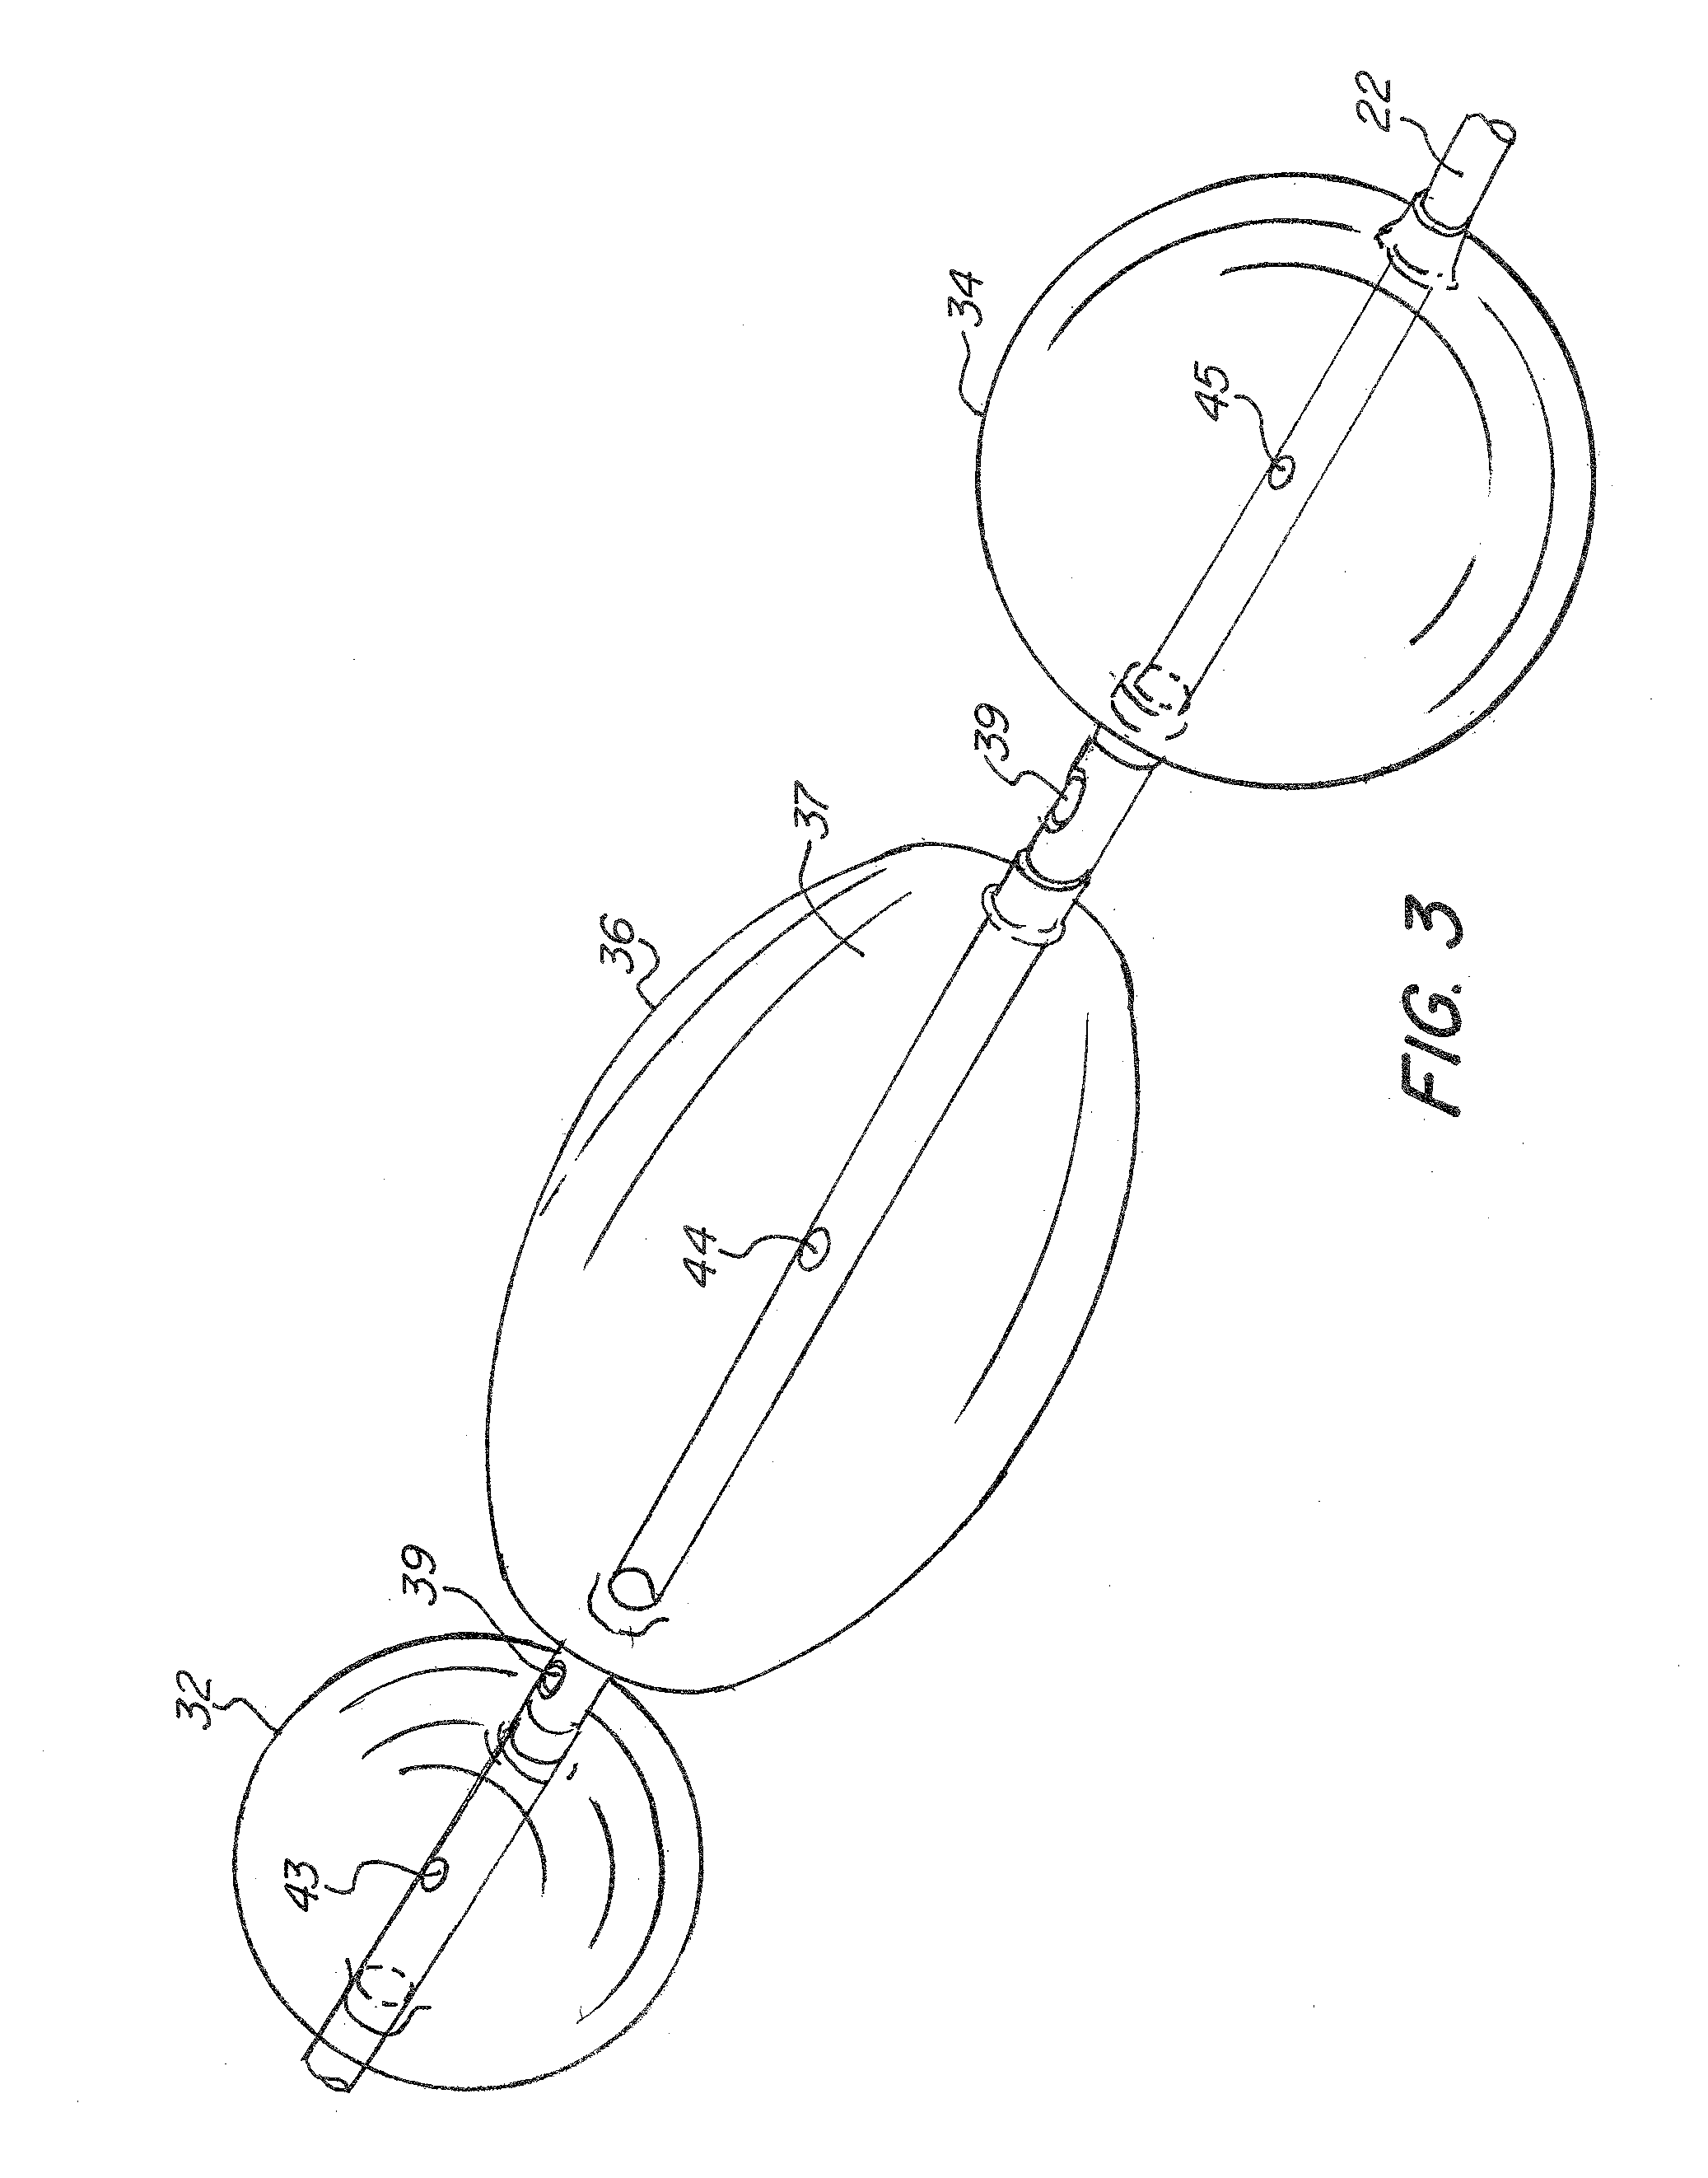 Multi-Balloon Catheter for Extravasated Drug Delivery